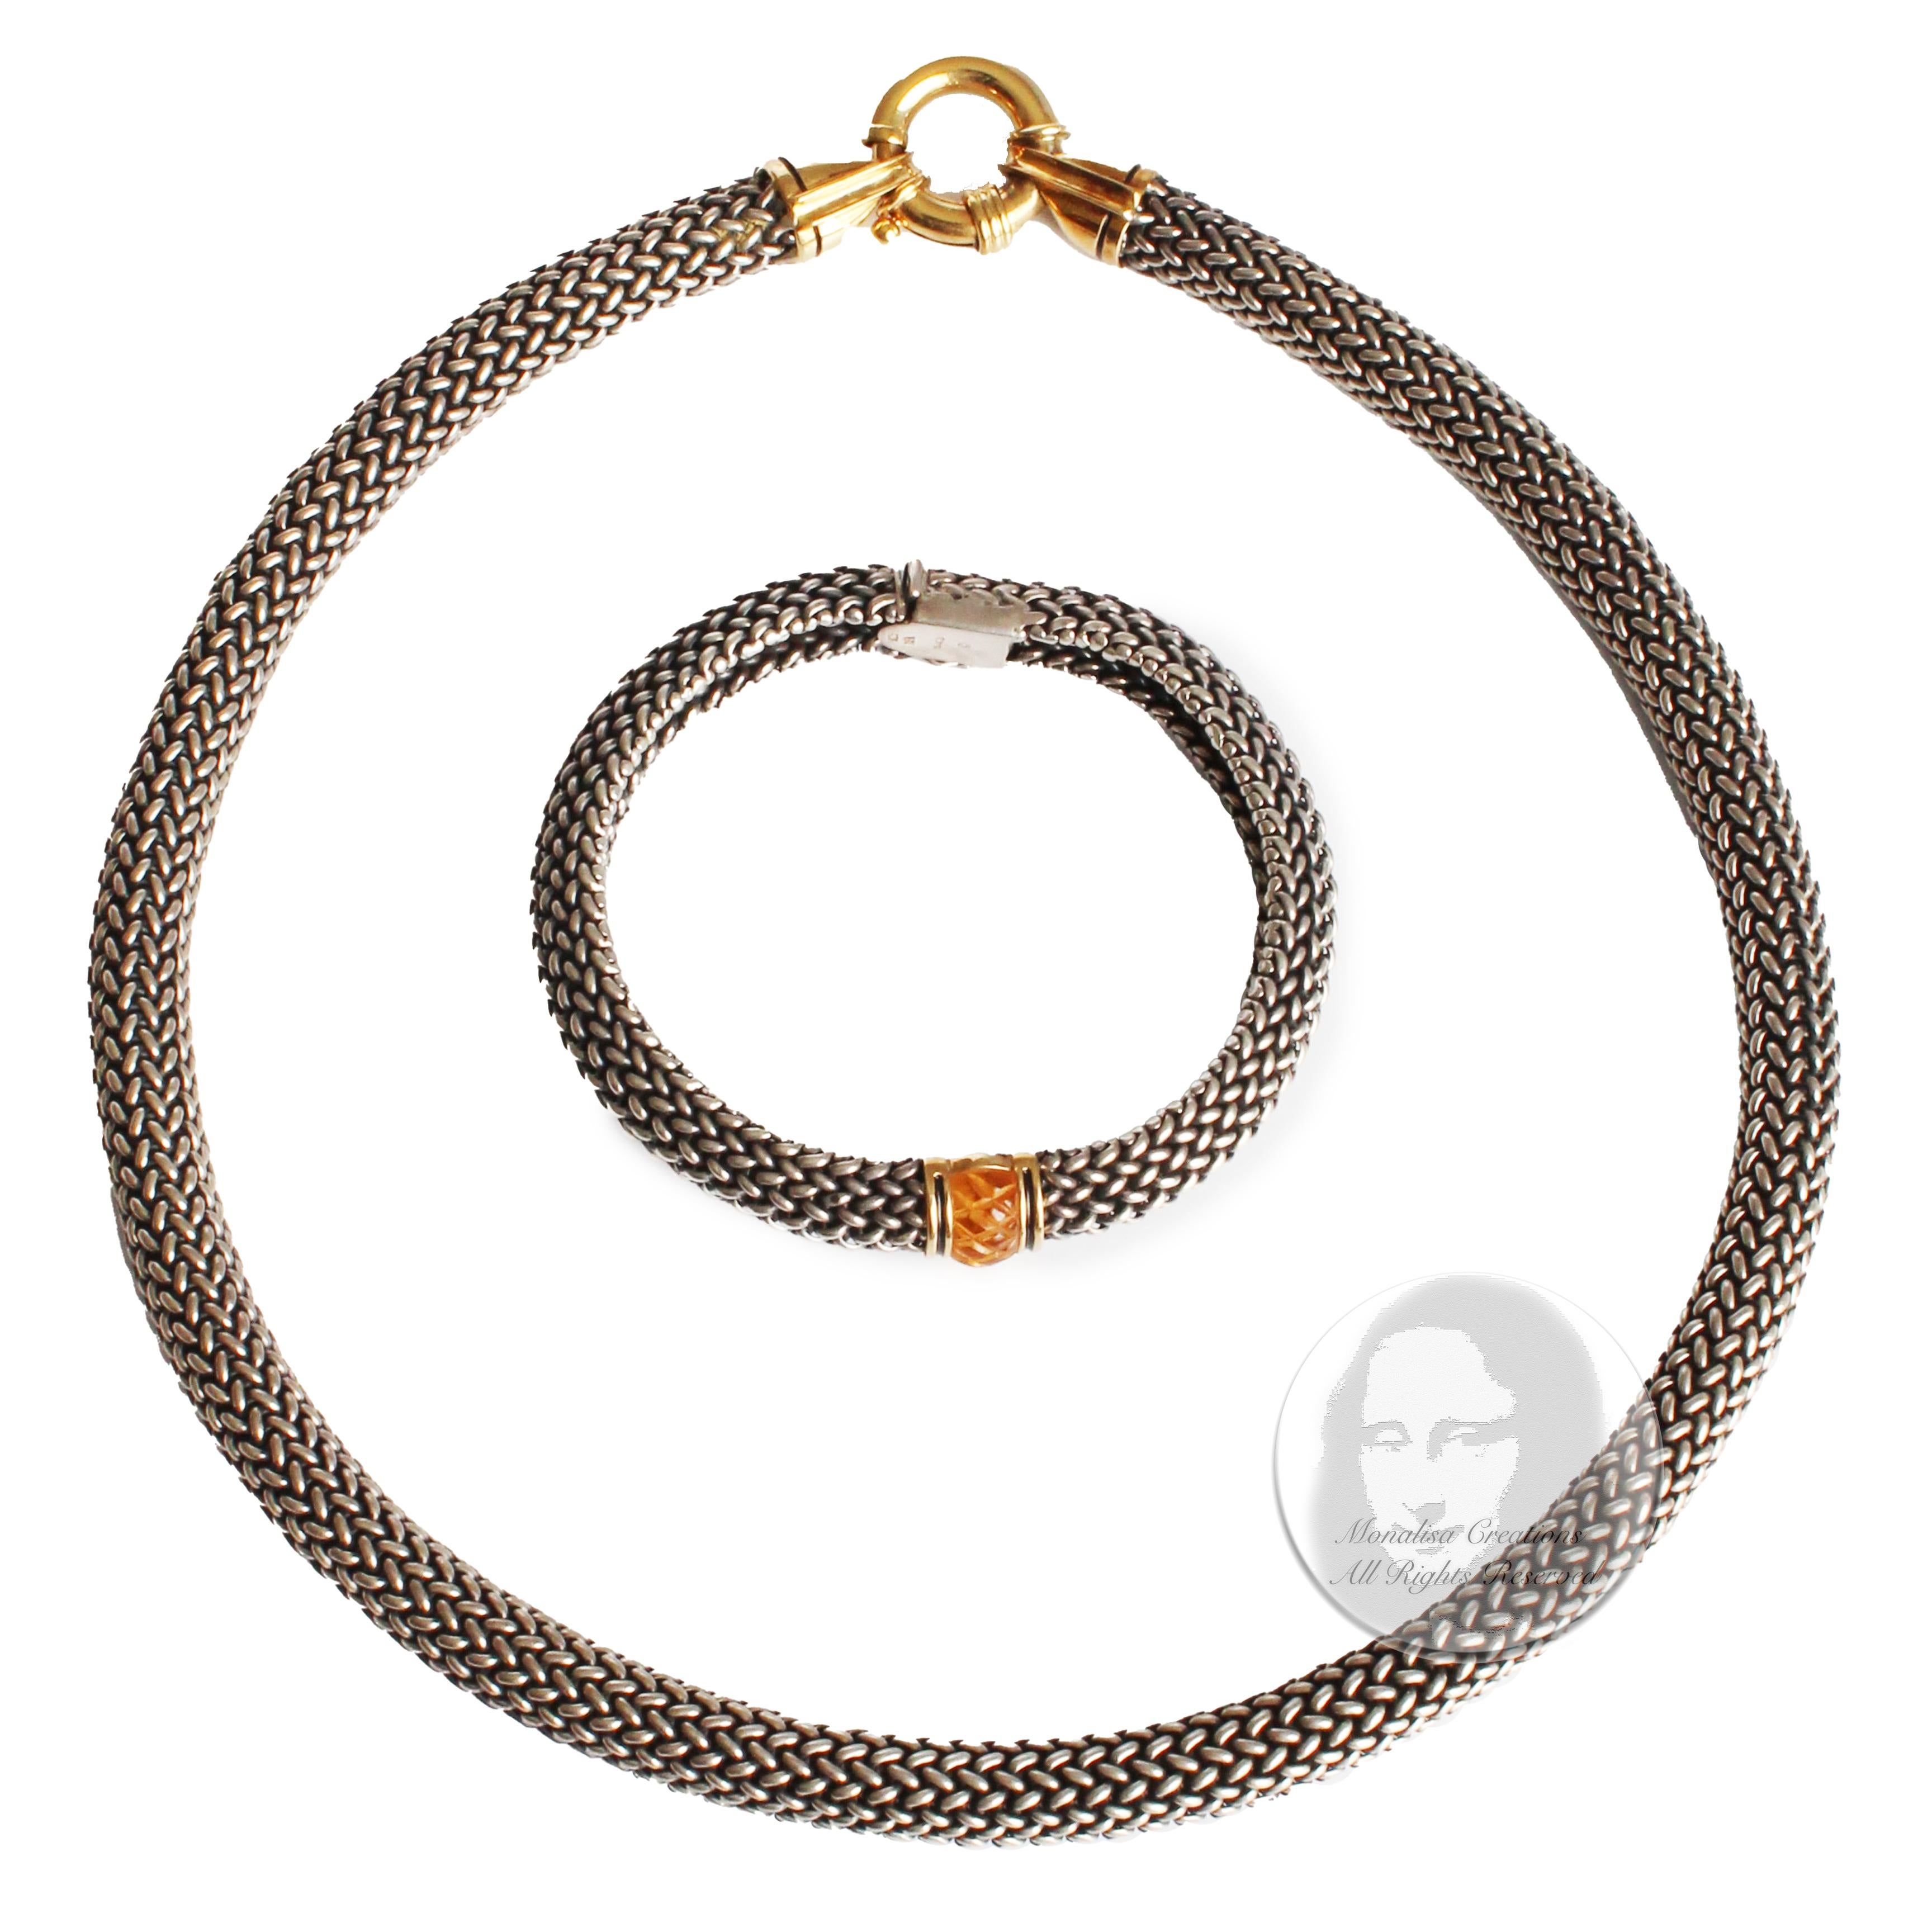 This incredible sterling silver and 18k gold mesh choker and citrine bracelet set was crafted by Scott Keating Jewelry, out of Colorado, most likely in the early 2000s. 

Both pieces in this set are made from a wonderful handwoven sterling mesh and